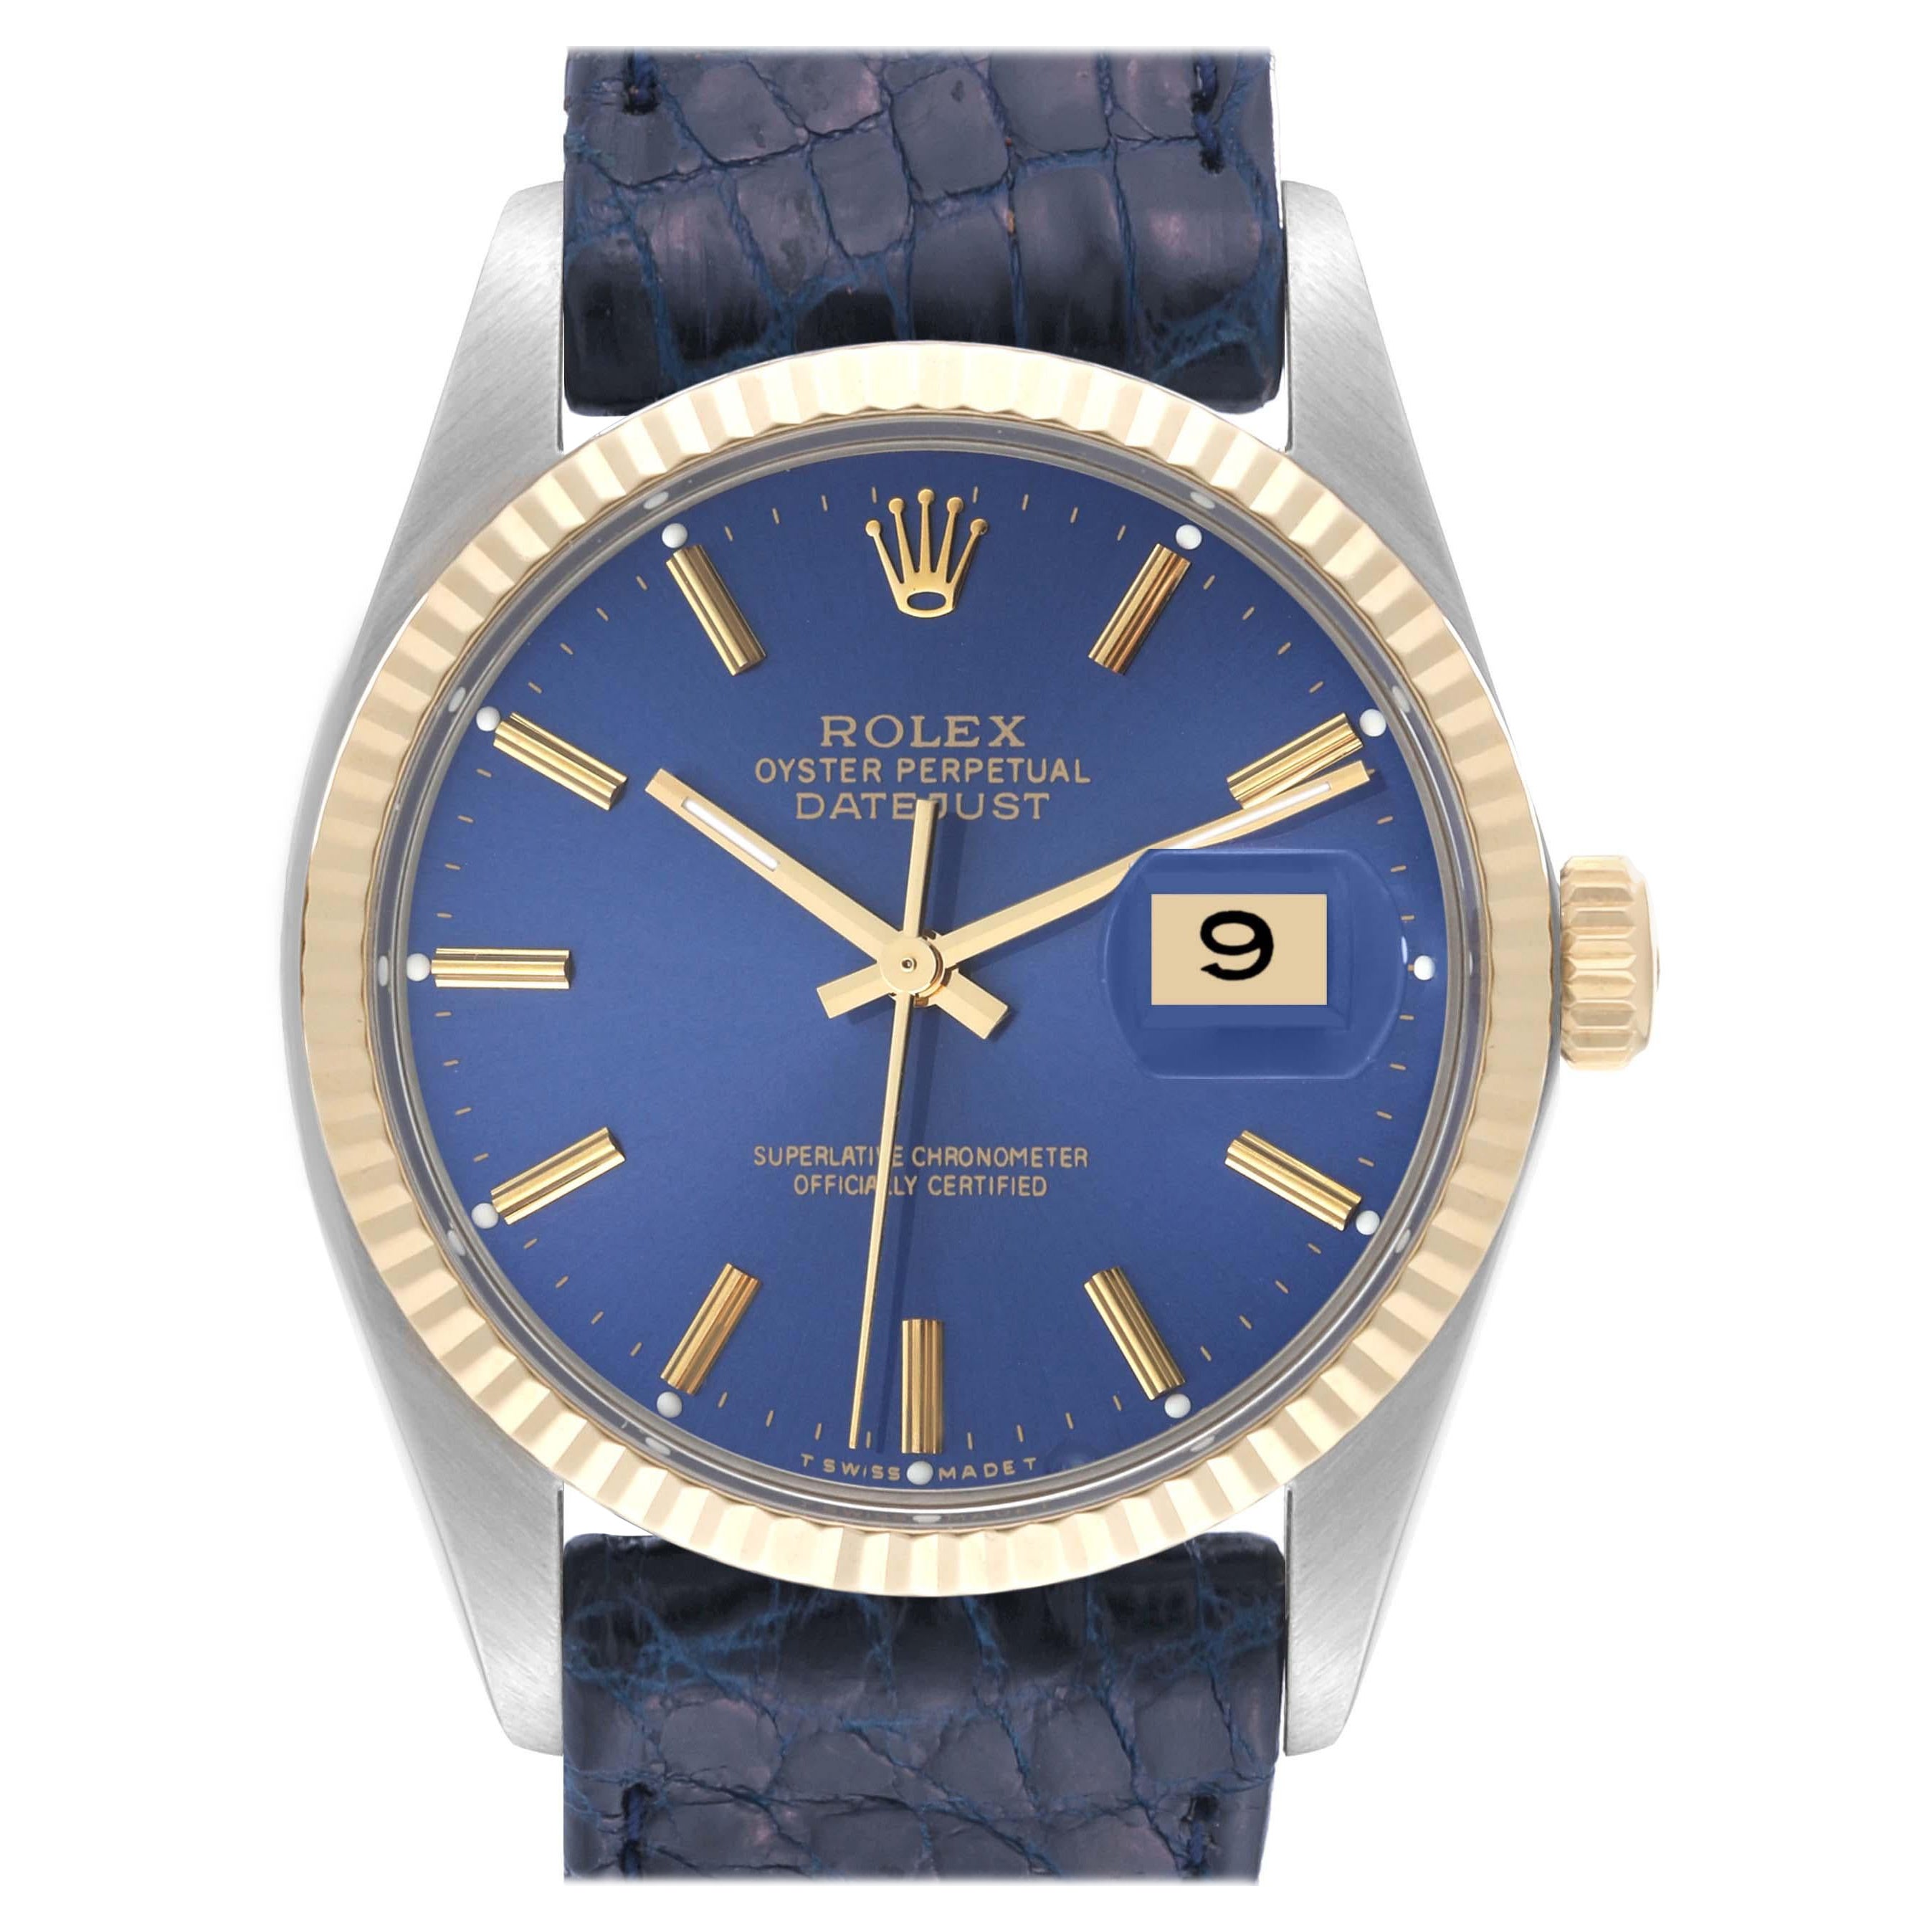 Rolex Datejust Steel Yellow Gold Blue Dial Vintage Mens Watch 16013